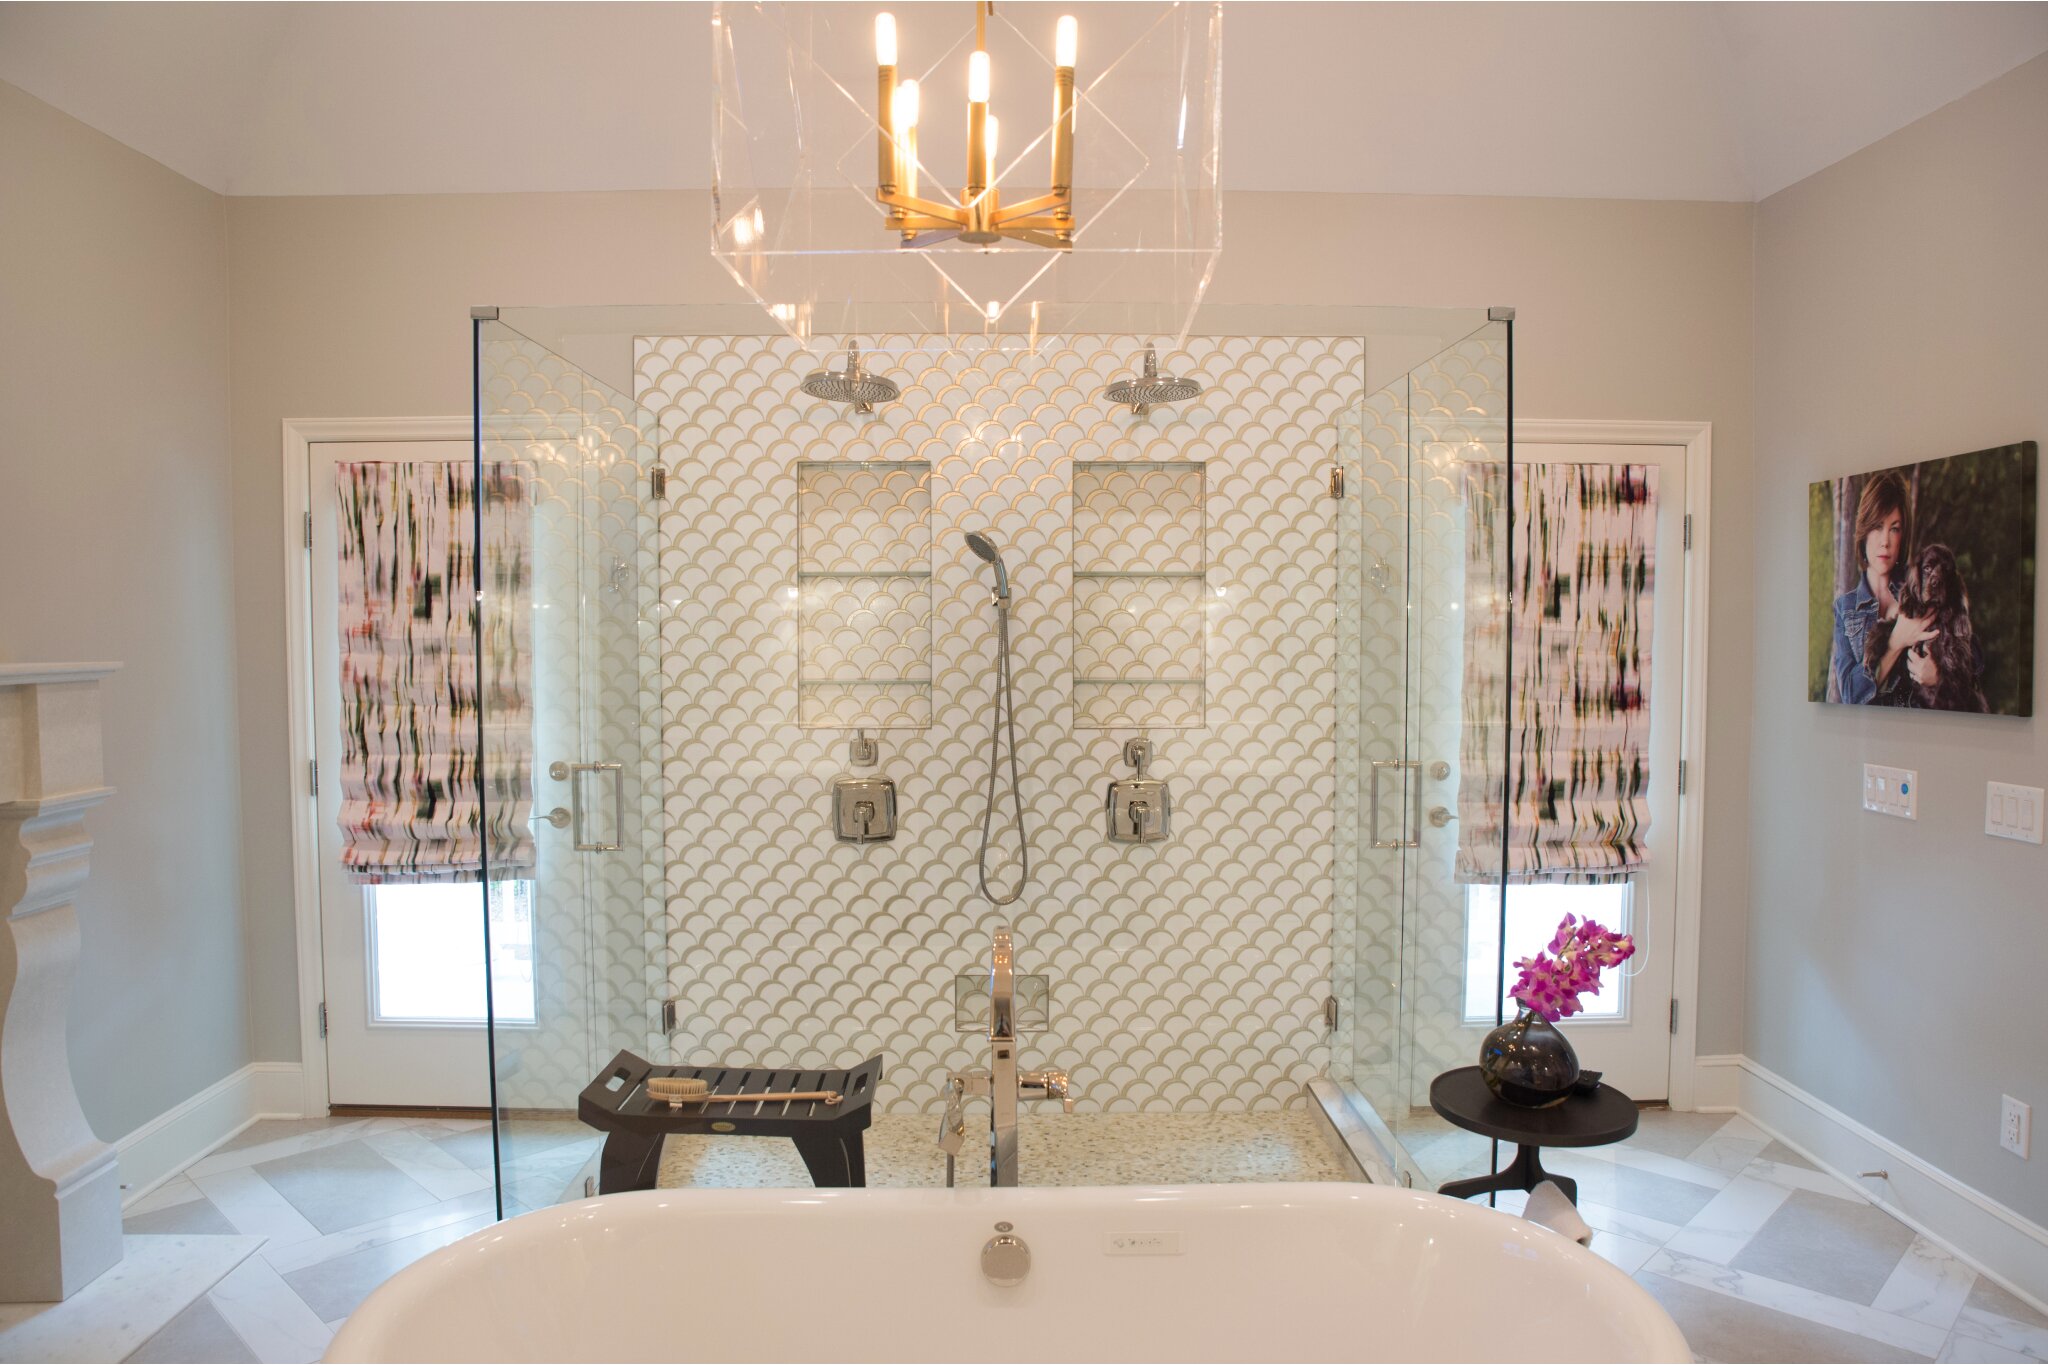 Bathroom remodel with chandelier over soaking tub and a separate large glass shower